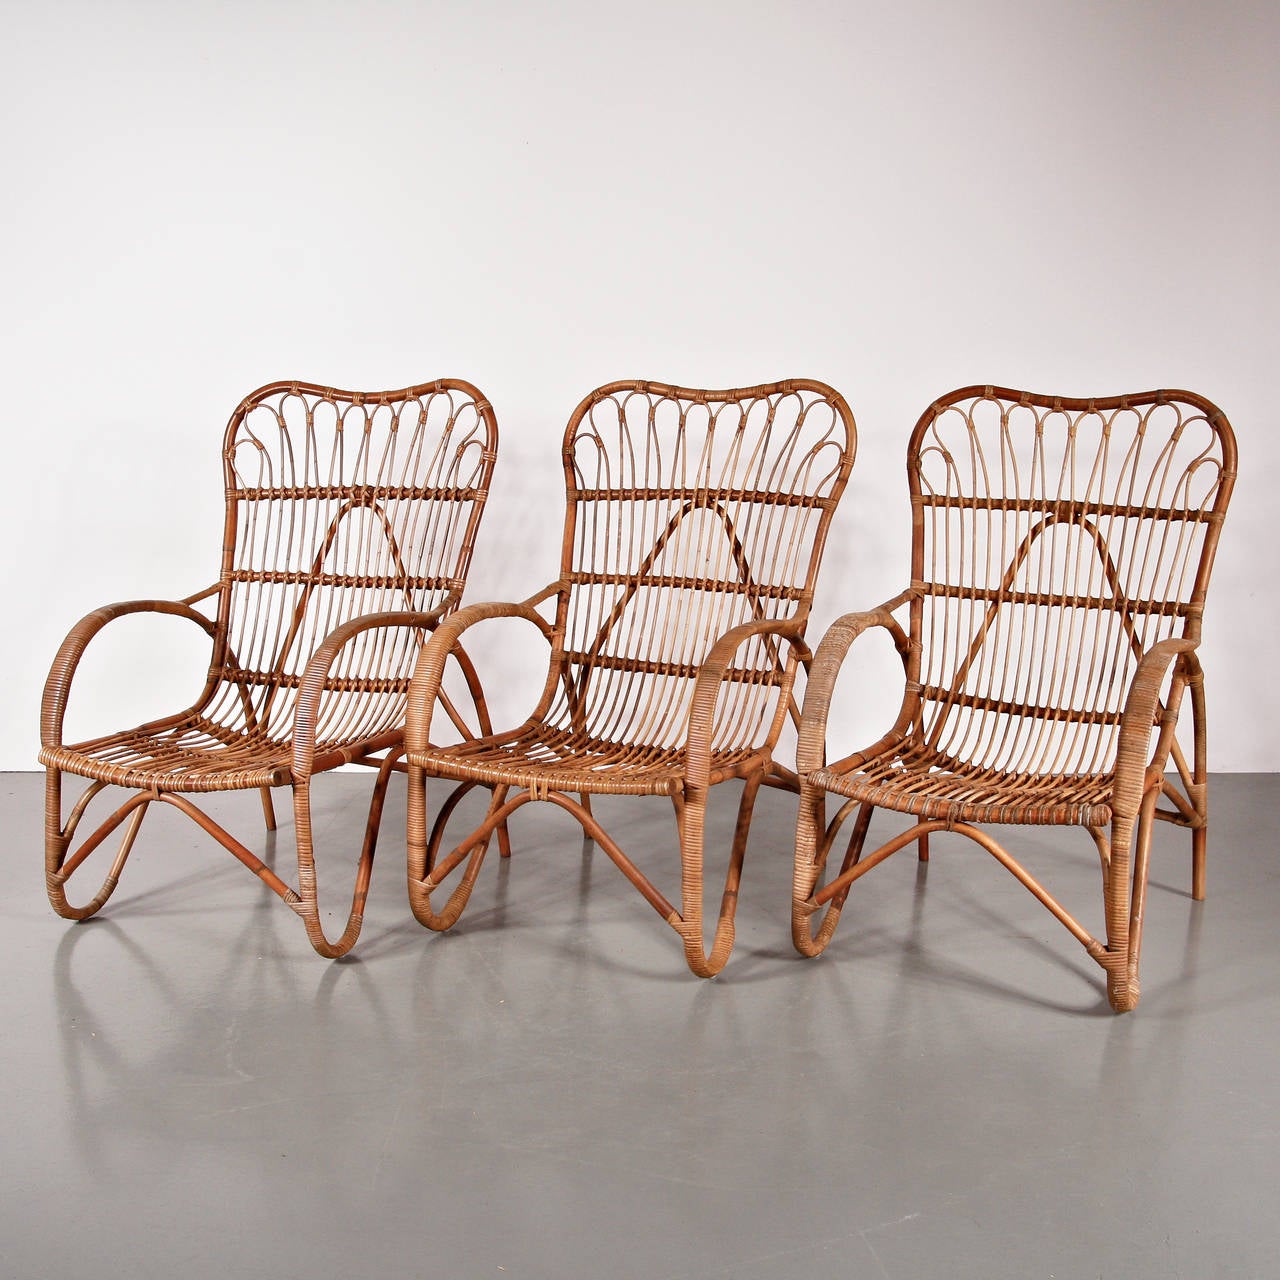 Set of three rattan armchairs designed by Dirk van Sliedrecht, circa 1960.
Manufactured in the Netherlands.

All in Rattan in perfect original vintage condition with a beautiful patina.